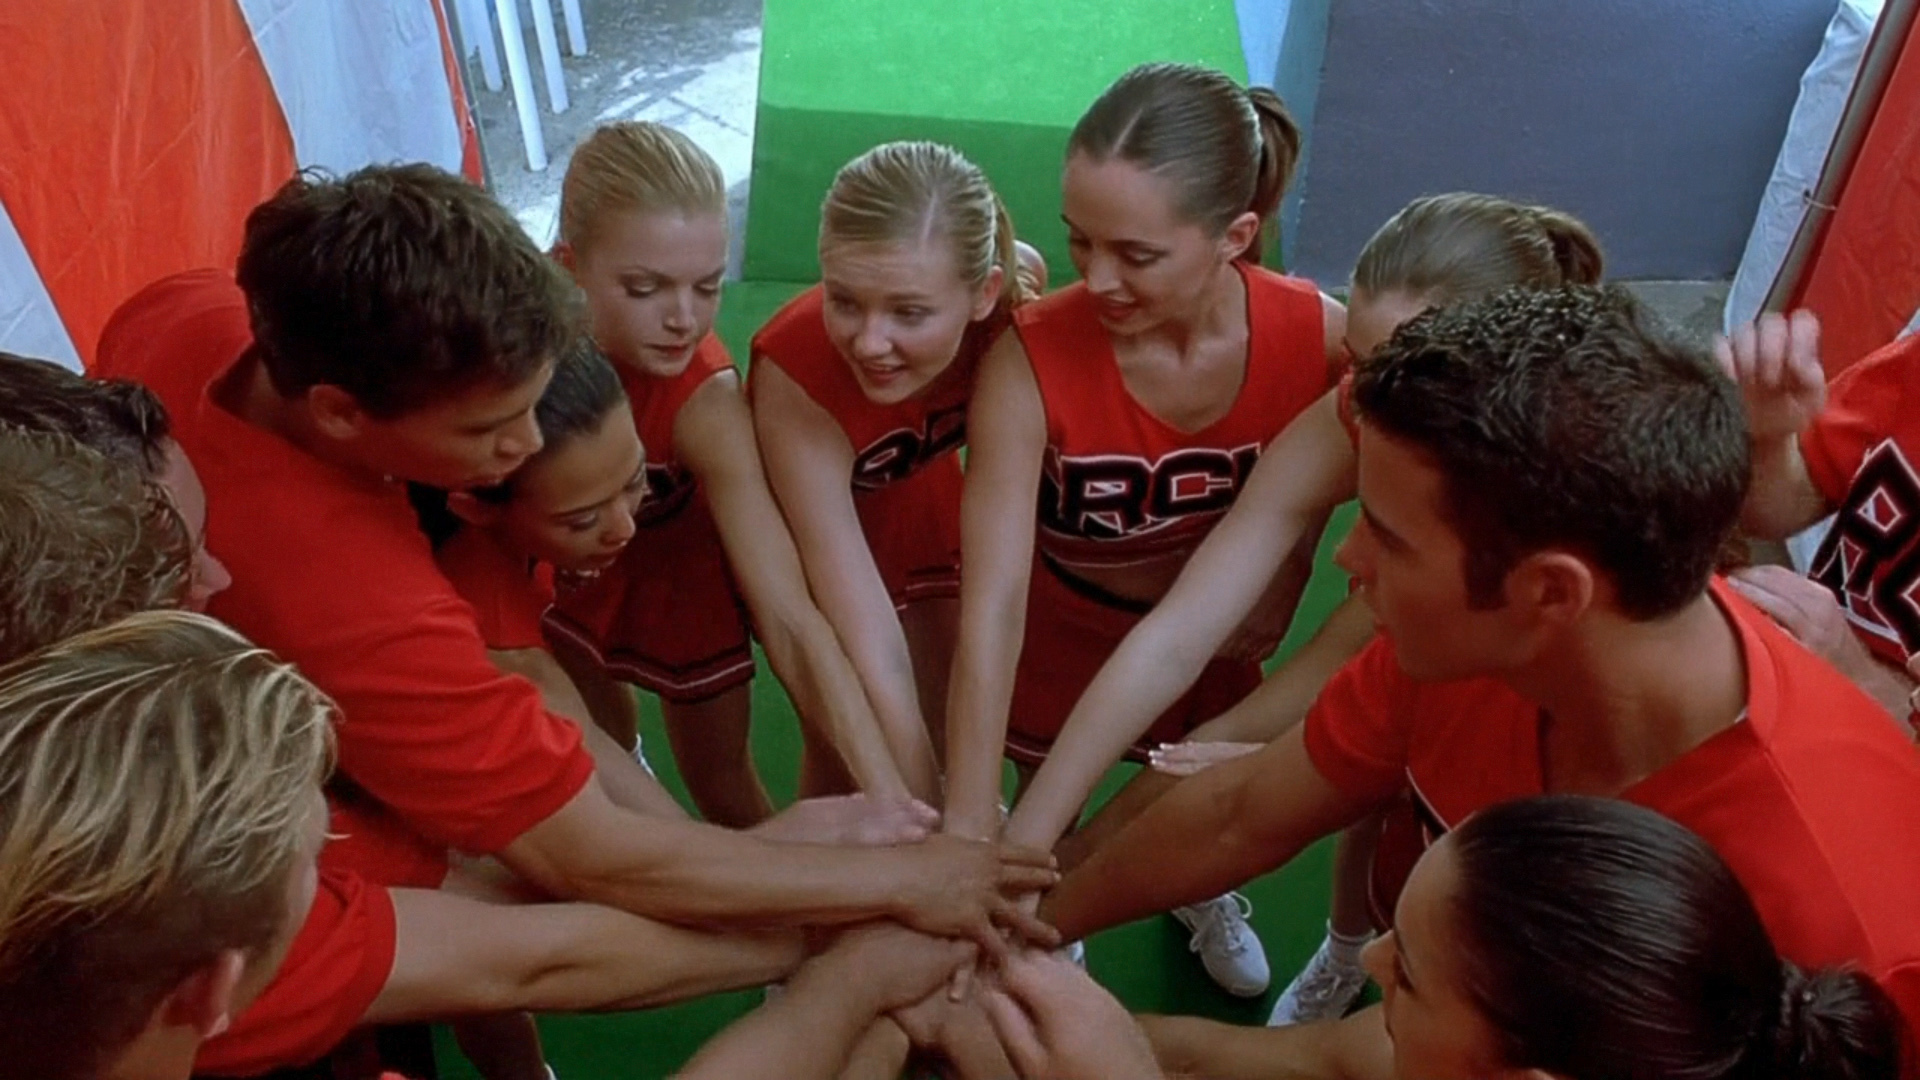 bring it on full movie free download